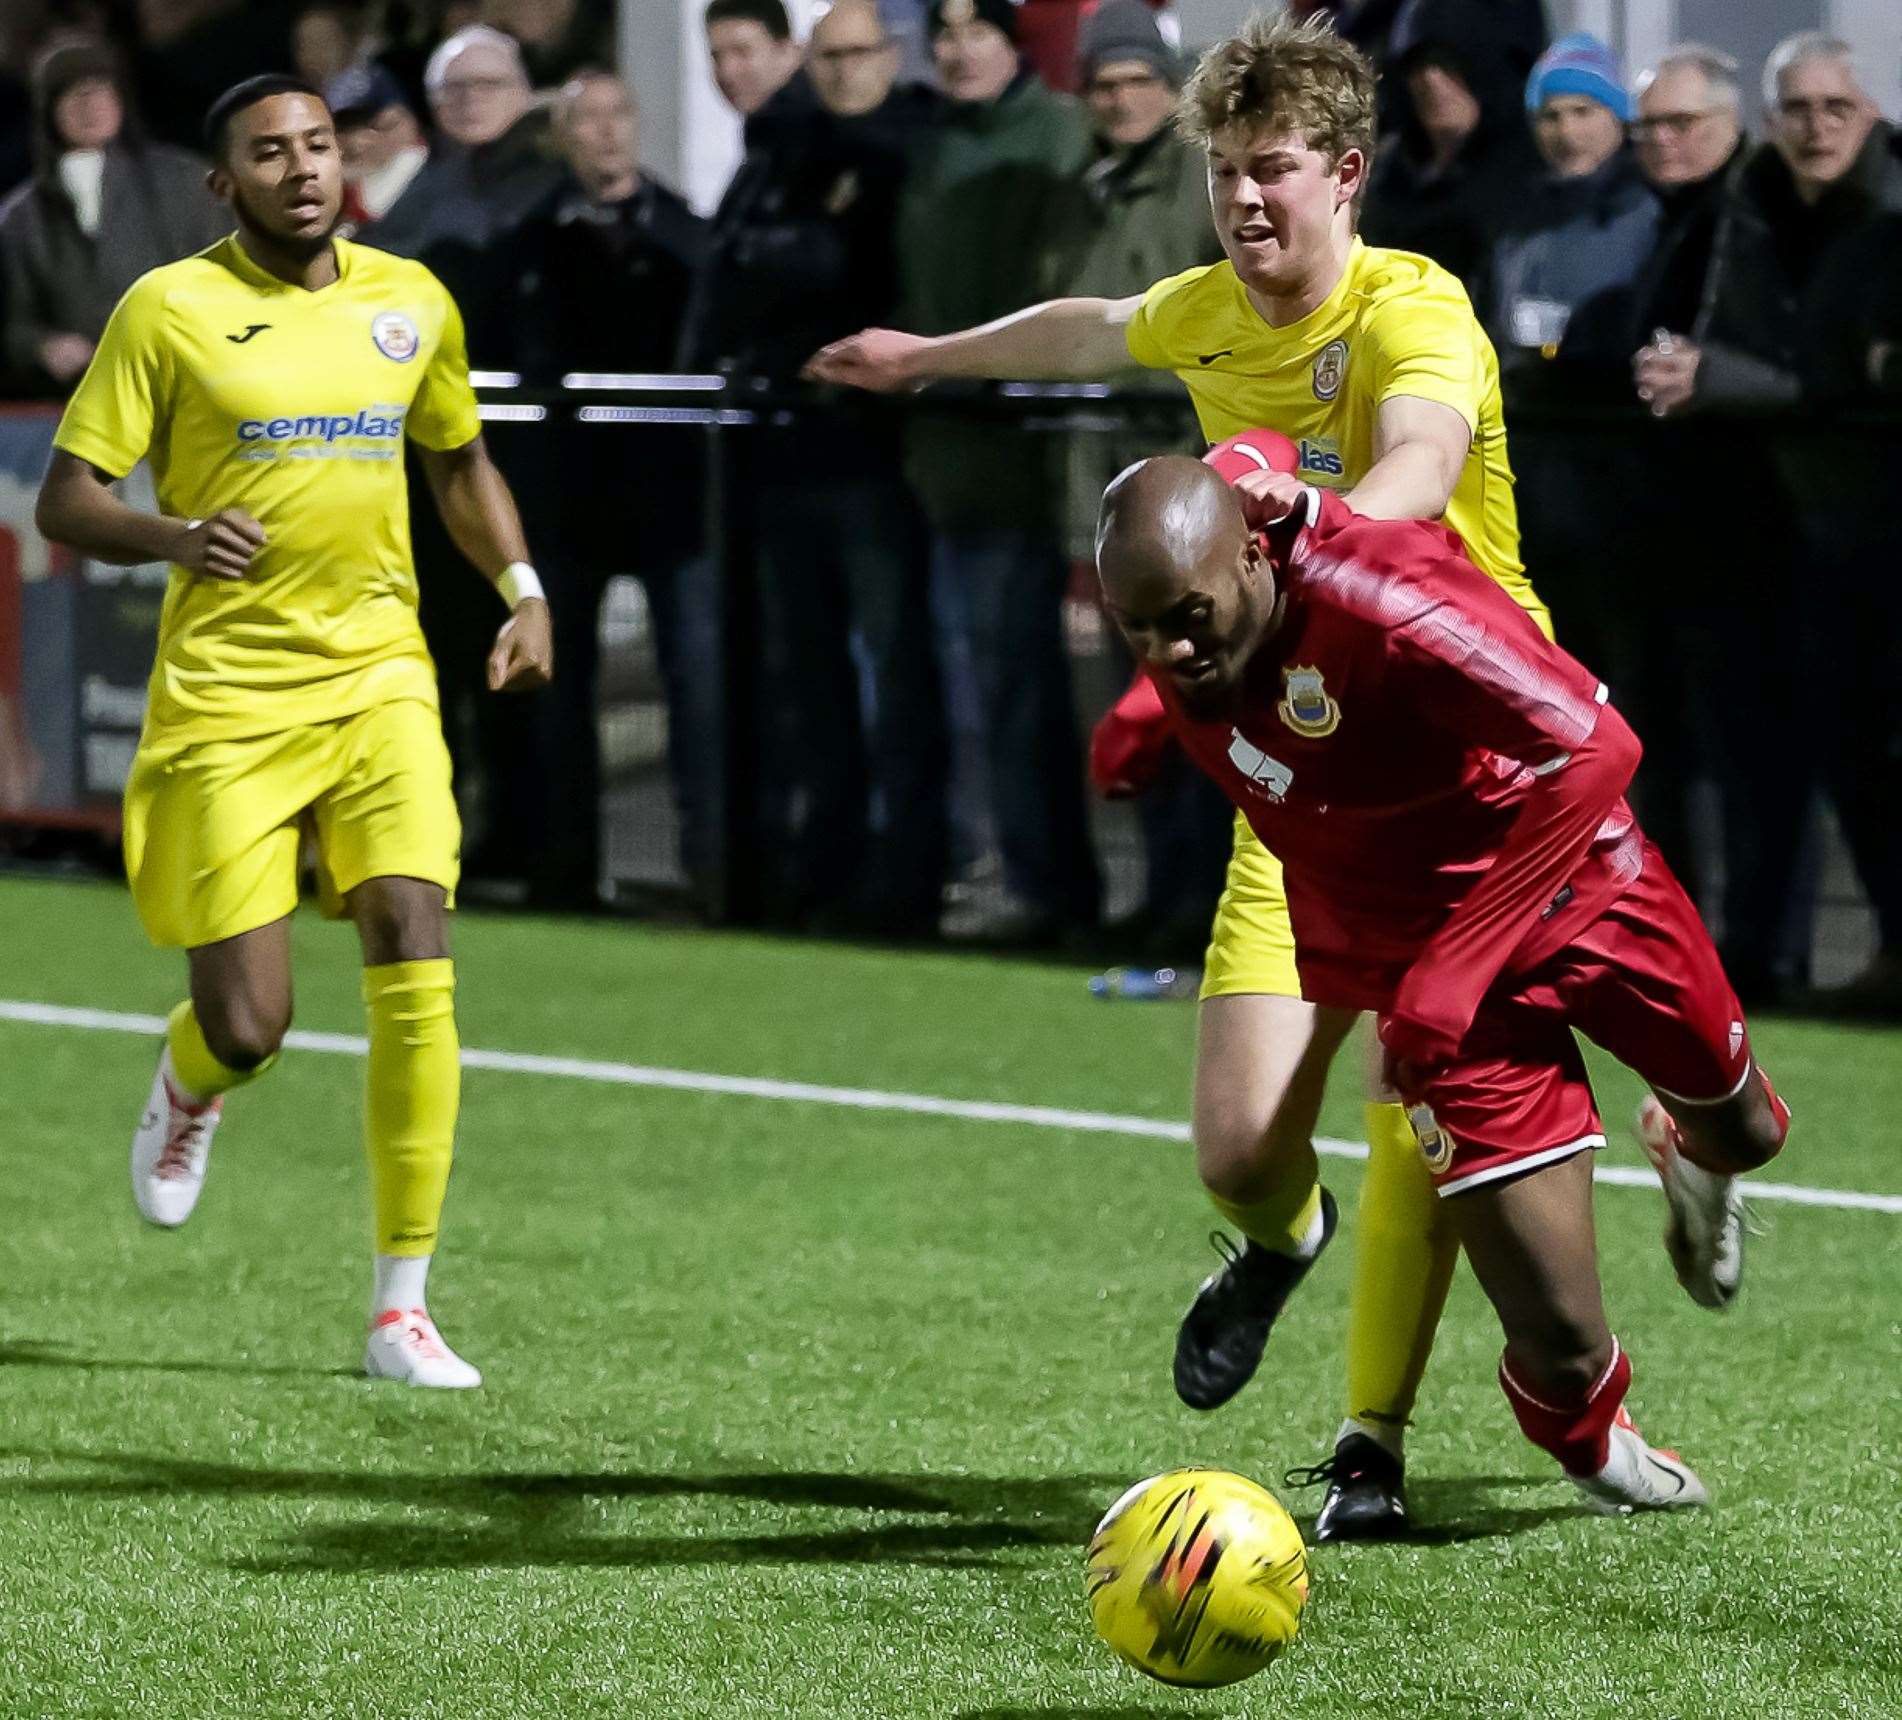 Whitstable home debutant Malachi Hudson is brought down during their 2-1 Kent Senior Trophy Semi-Final loss to Croydon on Tuesday night. Picture: Les Biggs